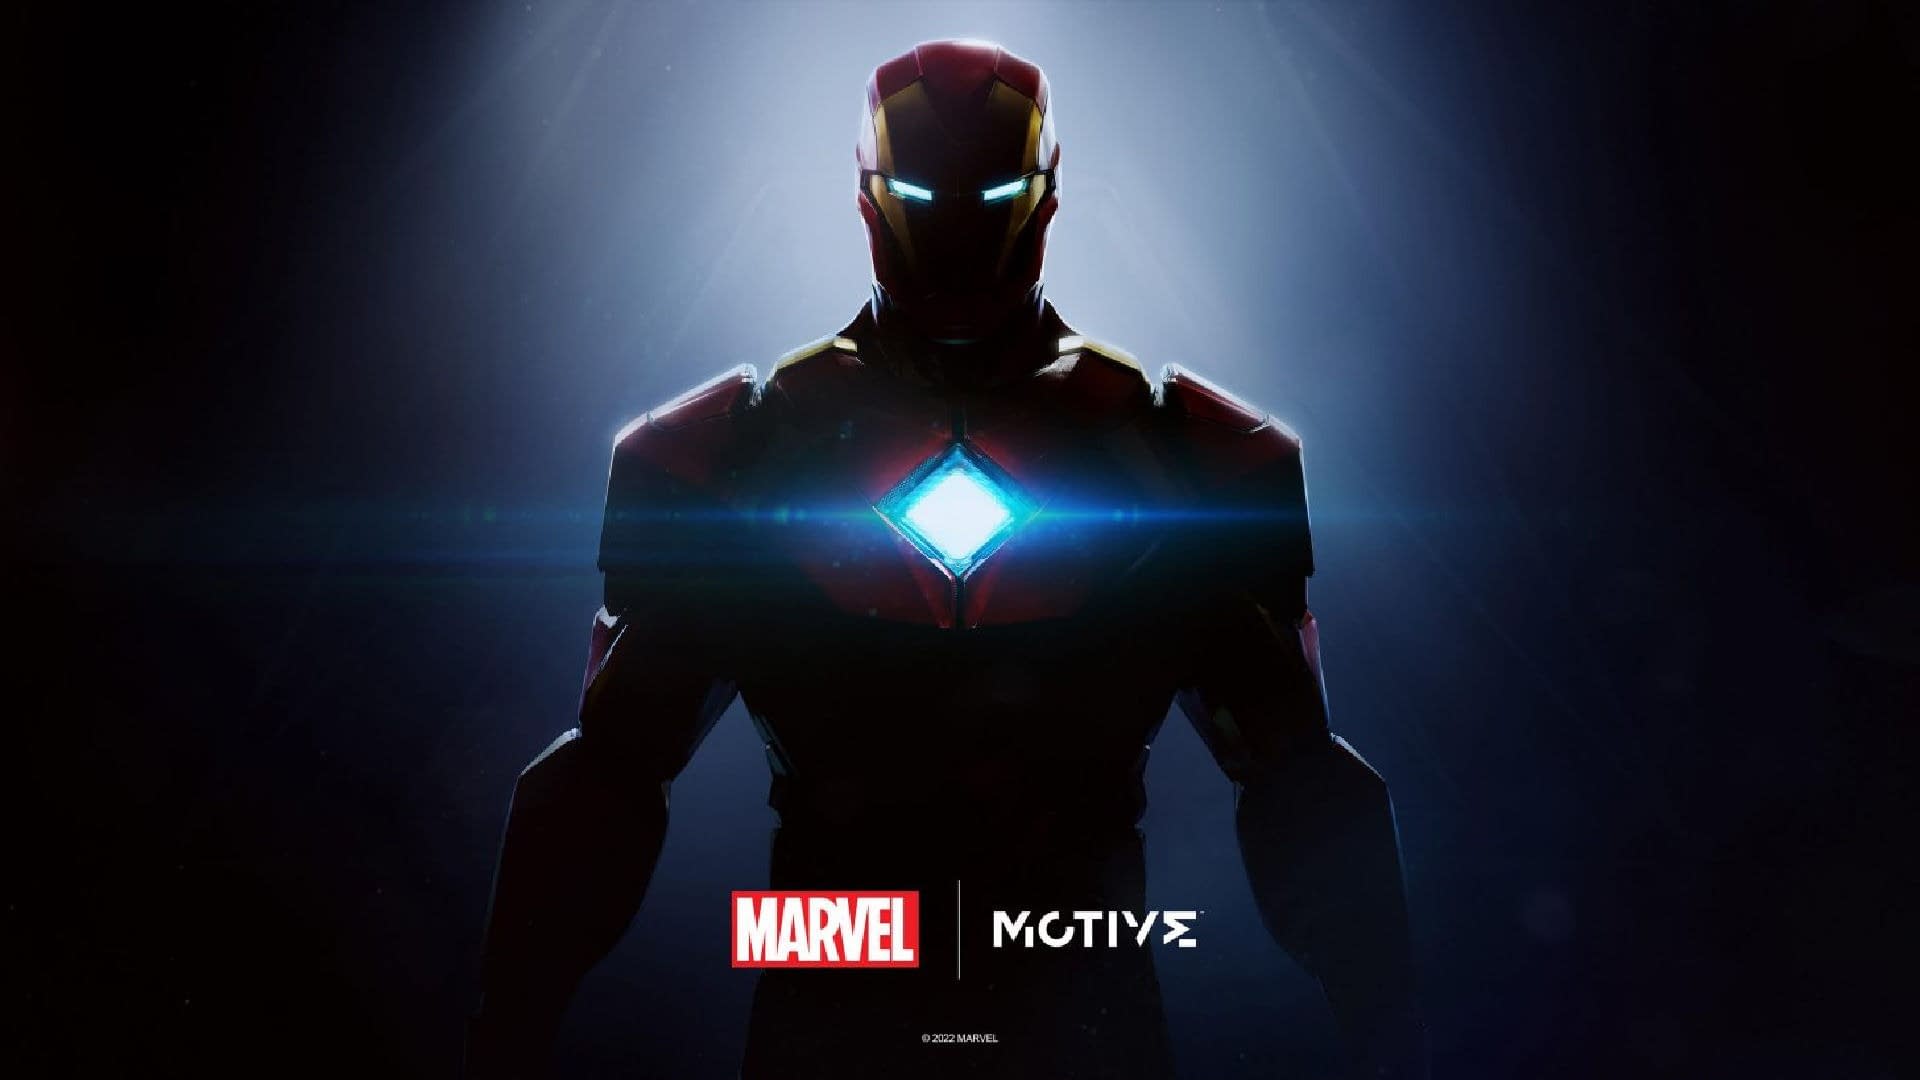 Ea’s New Iron Man Game comes with Frostbite Instead Unreal Engine 5